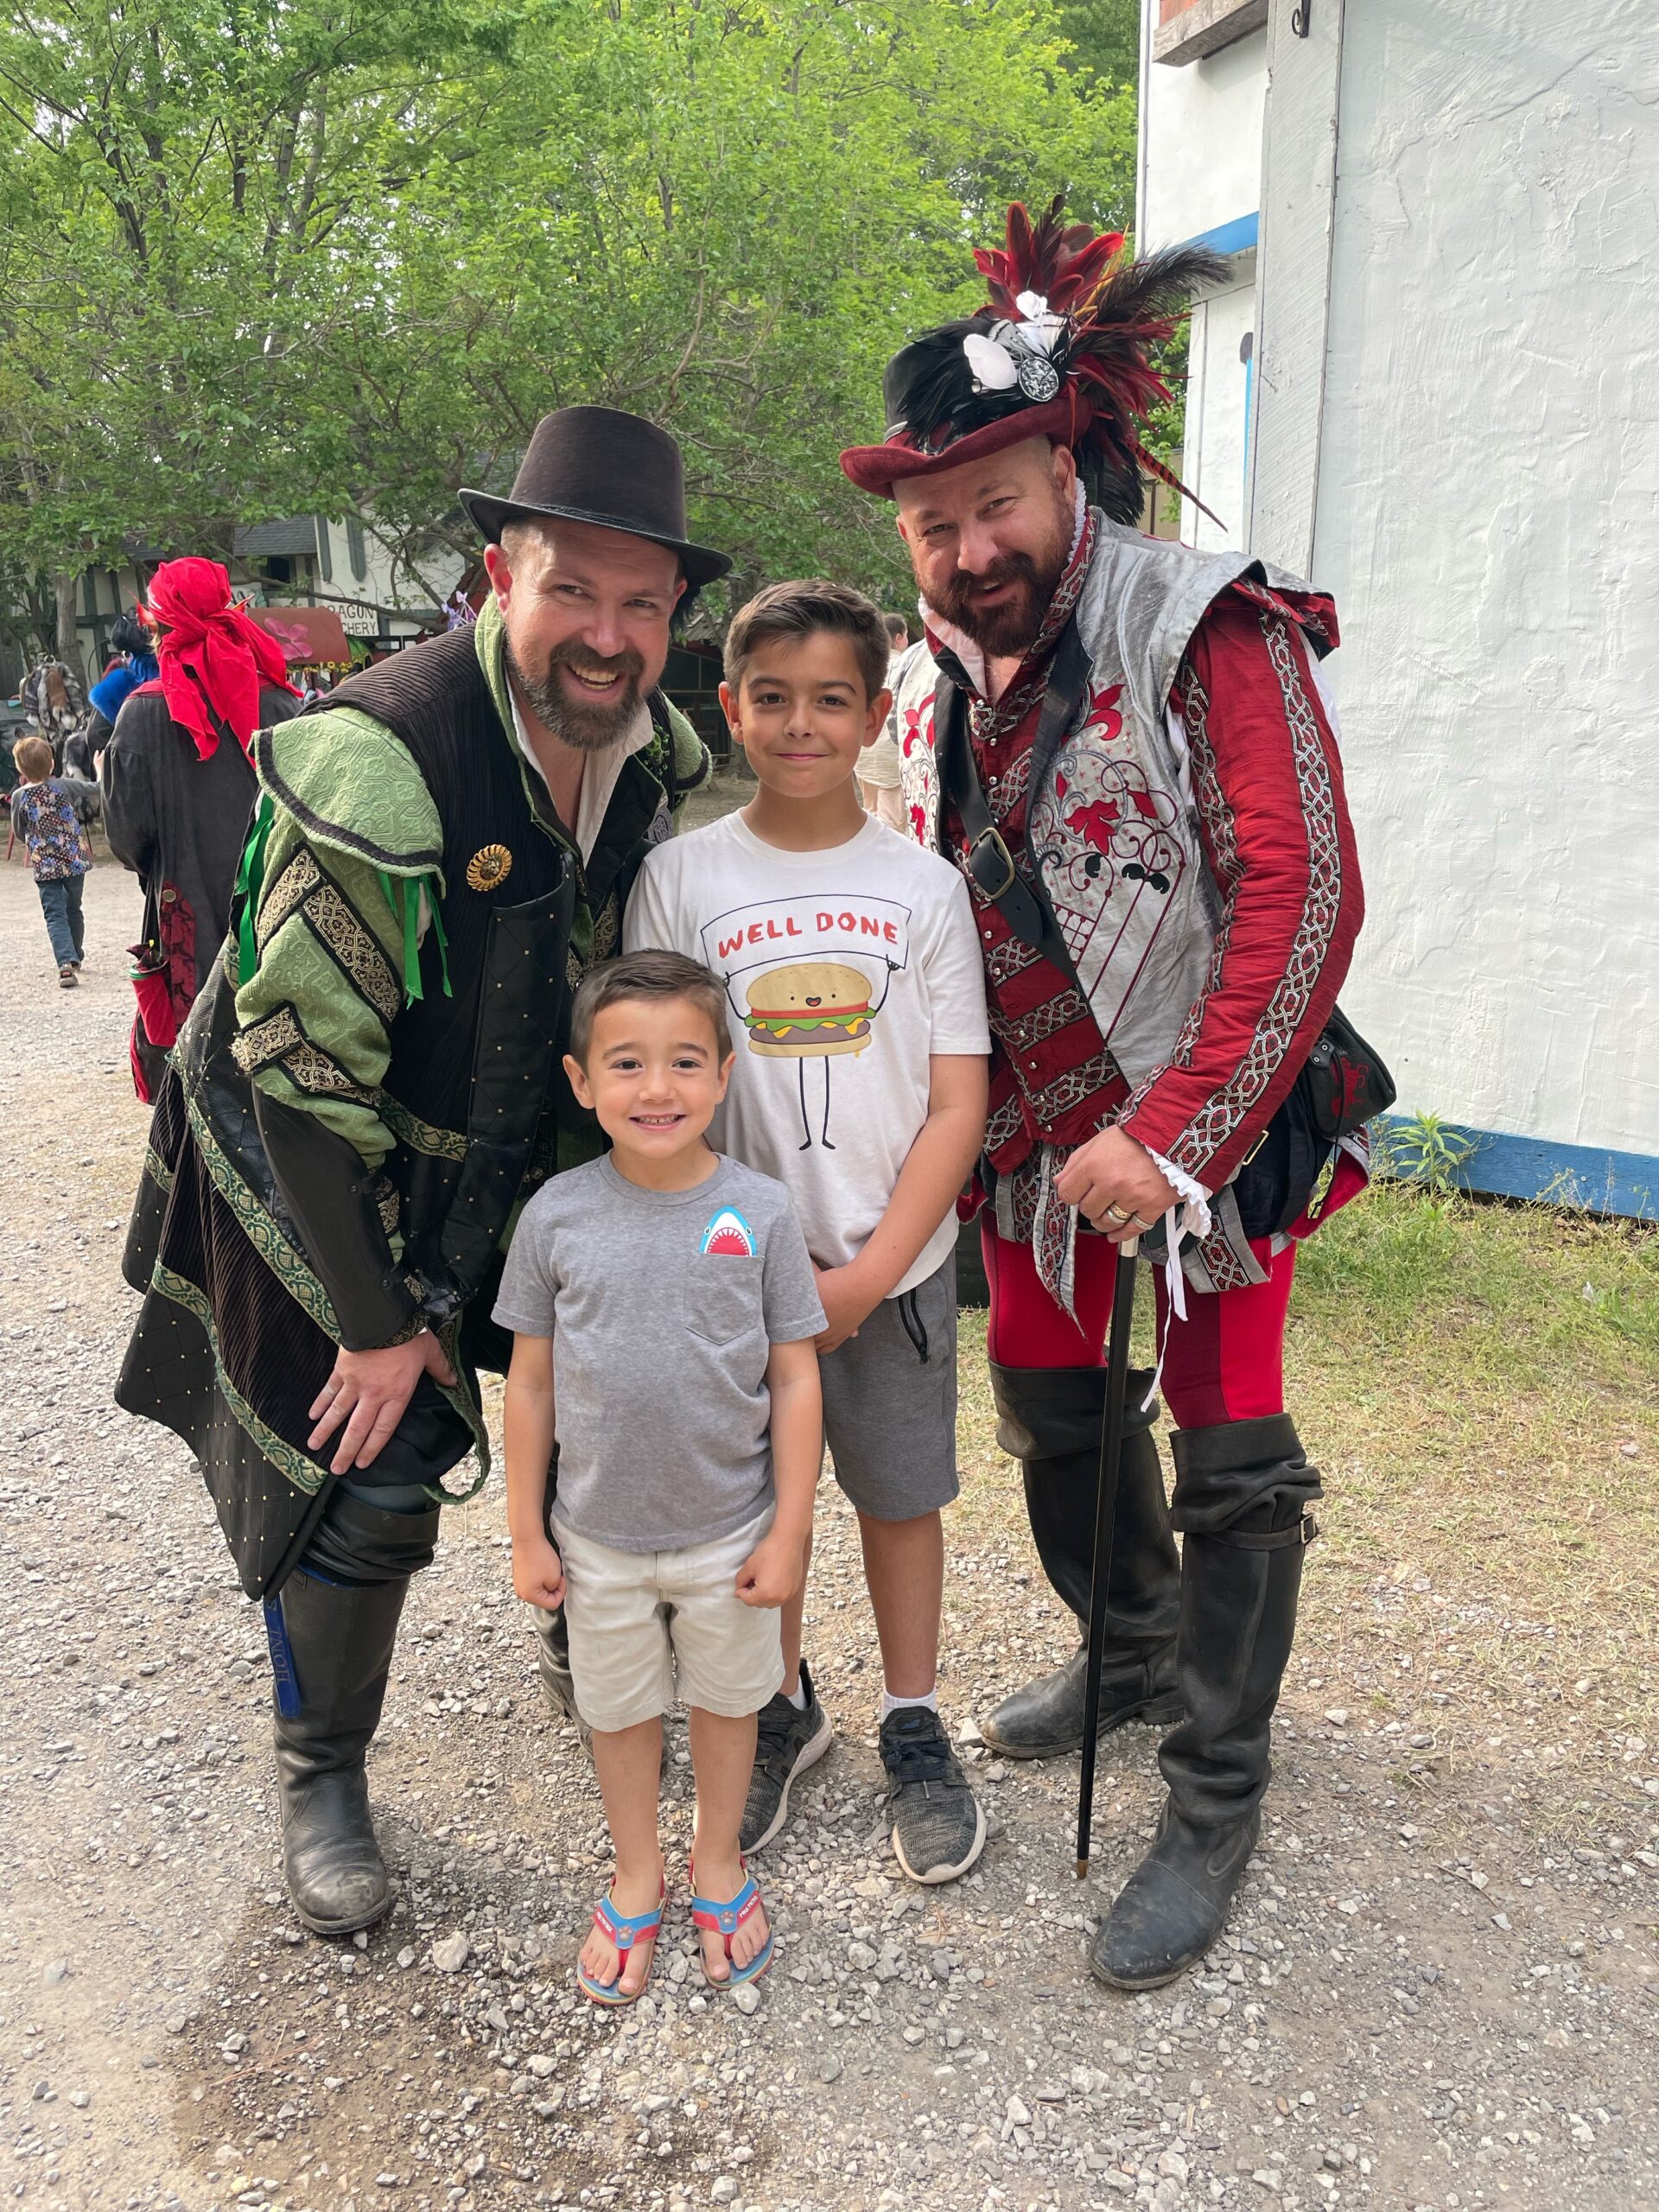 10 Reasons to visit the Castle of Muskogee Renaissance Faire.